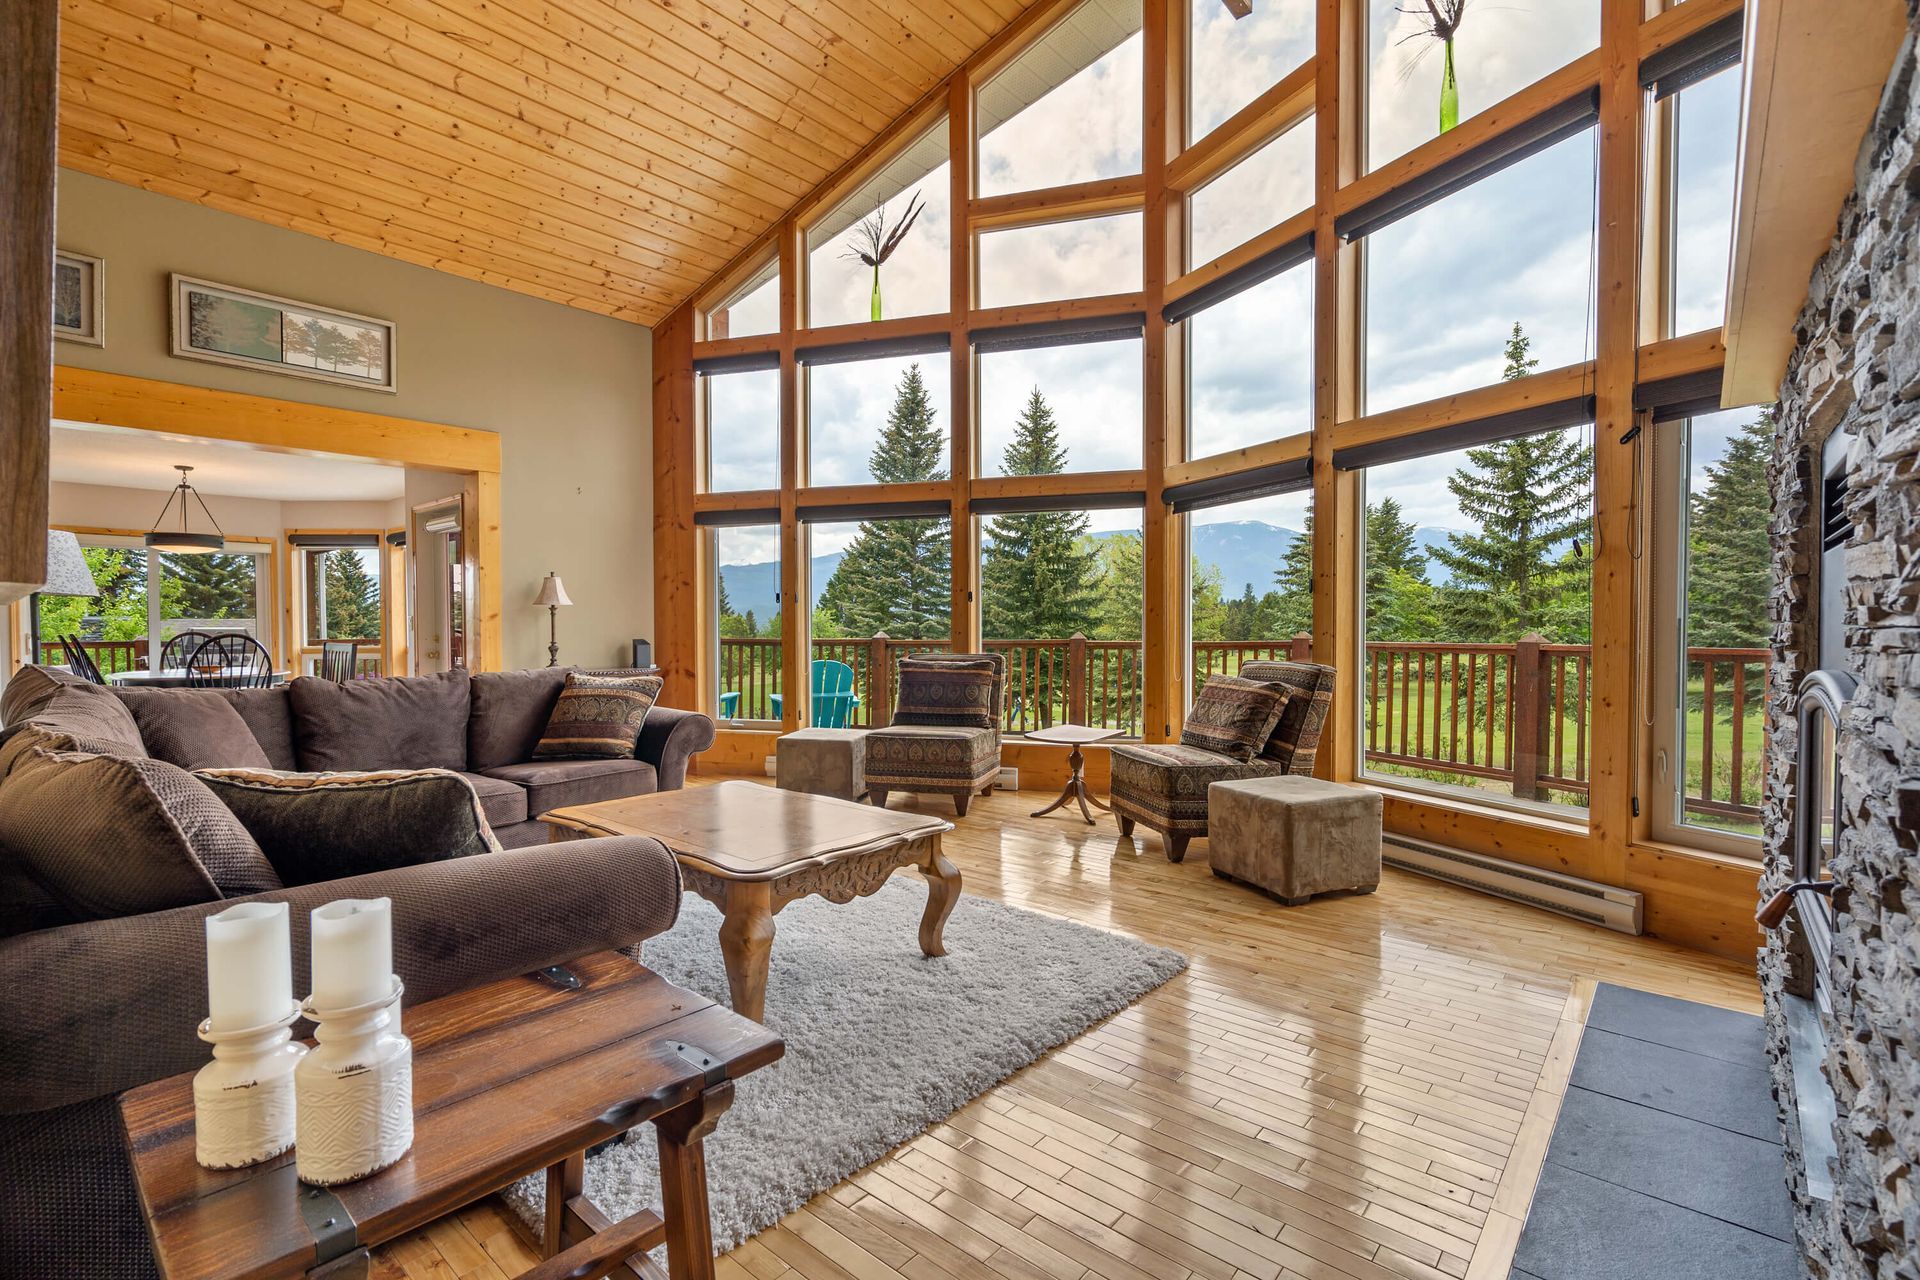 Views from the living room of  of the Fairway17, a Windermere BC Vacation Rental hosted by Aisling Baile Property Management.